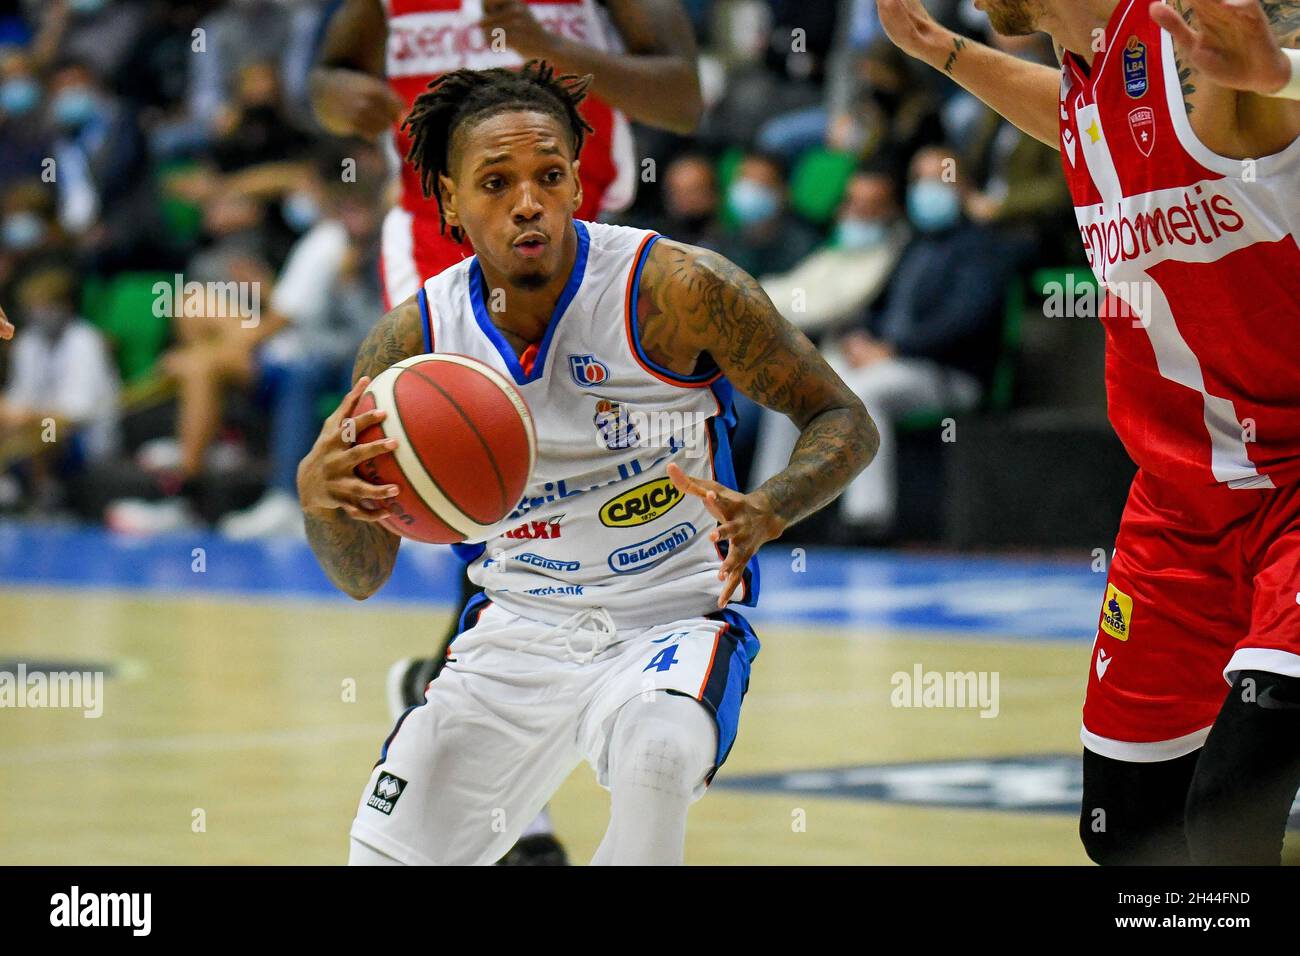 Treviso, Italy. 31st Oct, 2021. Dewayne Russell (Treviso) in action during Nutribullet Treviso Basket vs Openjobmetis Varese, Italian Basketball A Serie Championship in Treviso, Italy, October 31 2021 Credit: Independent Photo Agency/Alamy Live News Stock Photo